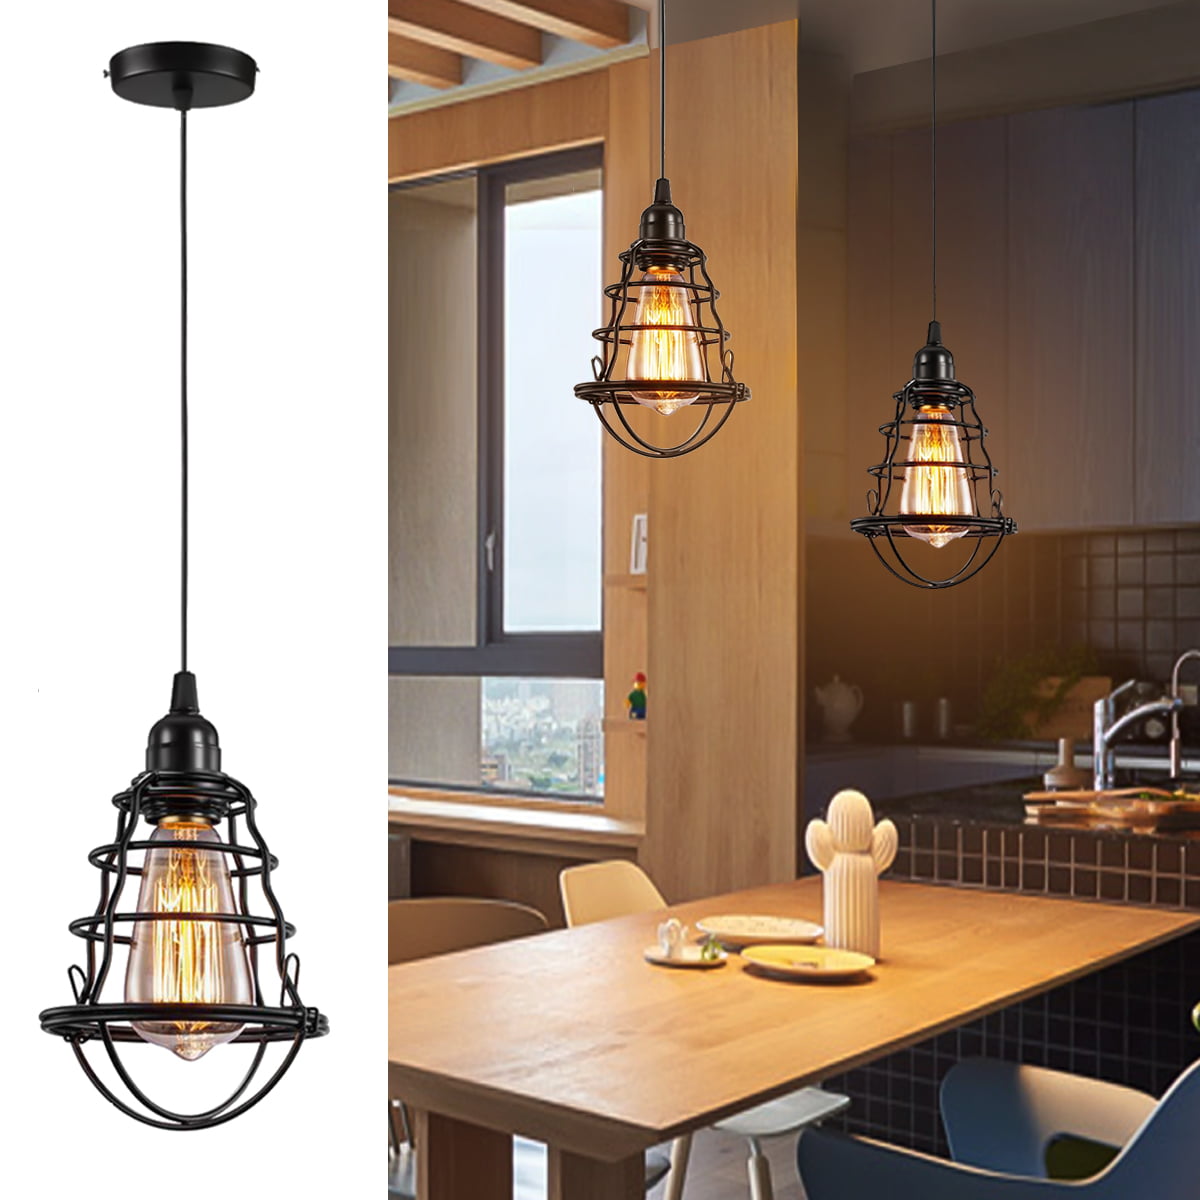 Details about   Industrial Ceiling Light Shade Easy Fit Vintage Pendant Lighting Glass Shade 